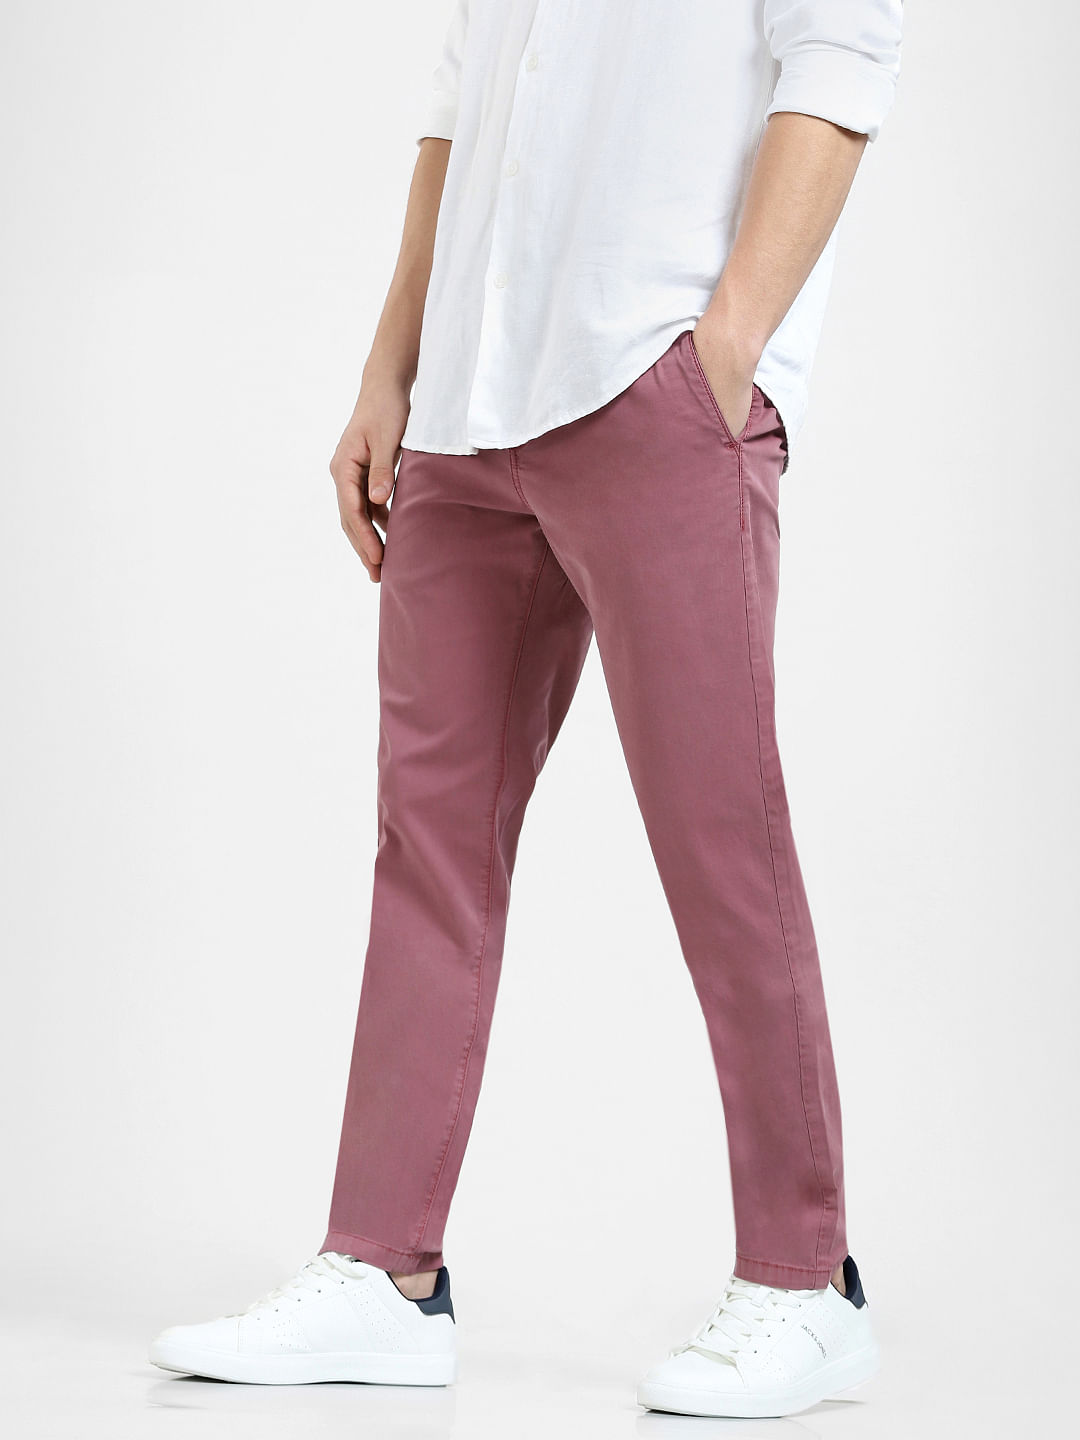 Buy Payodhi Regular Fit Men Grey Trousers Online at Best Prices in India   JioMart